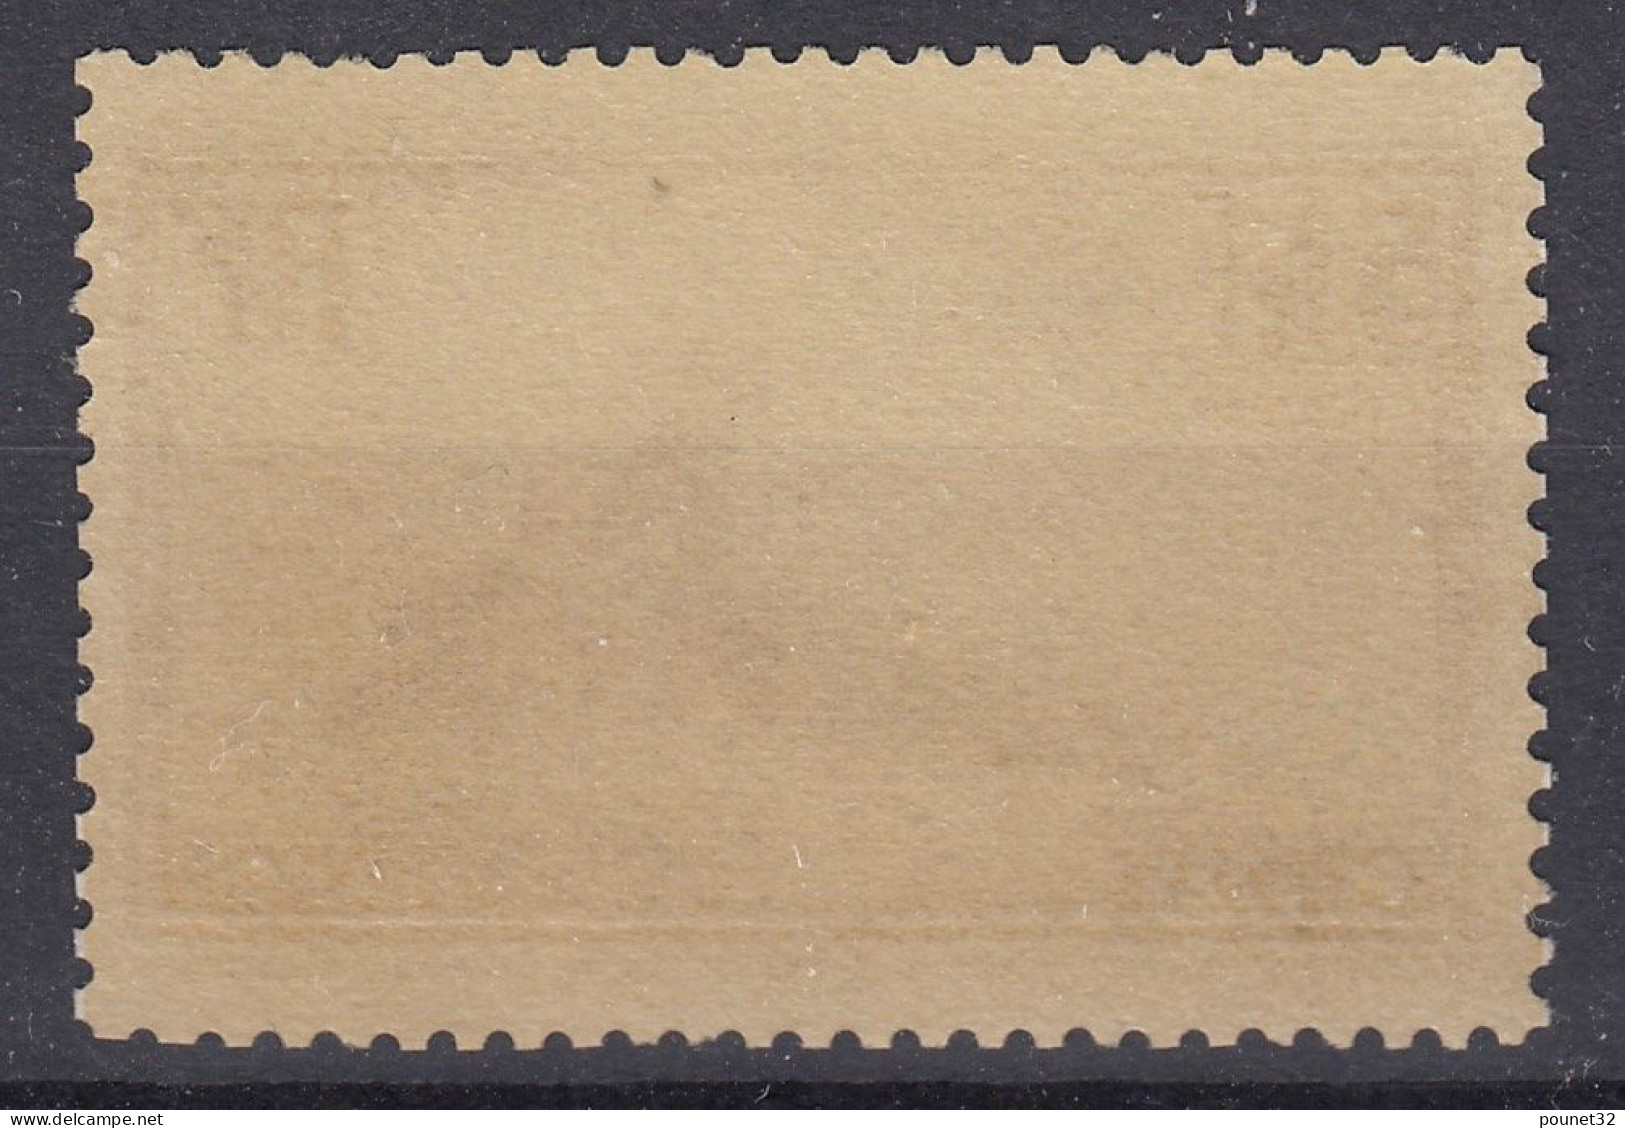 TIMBRE FRANCE MONT ST MICHEL N° 260a TYPE I NEUF ** GOMME SANS CHARNIERE - Neufs